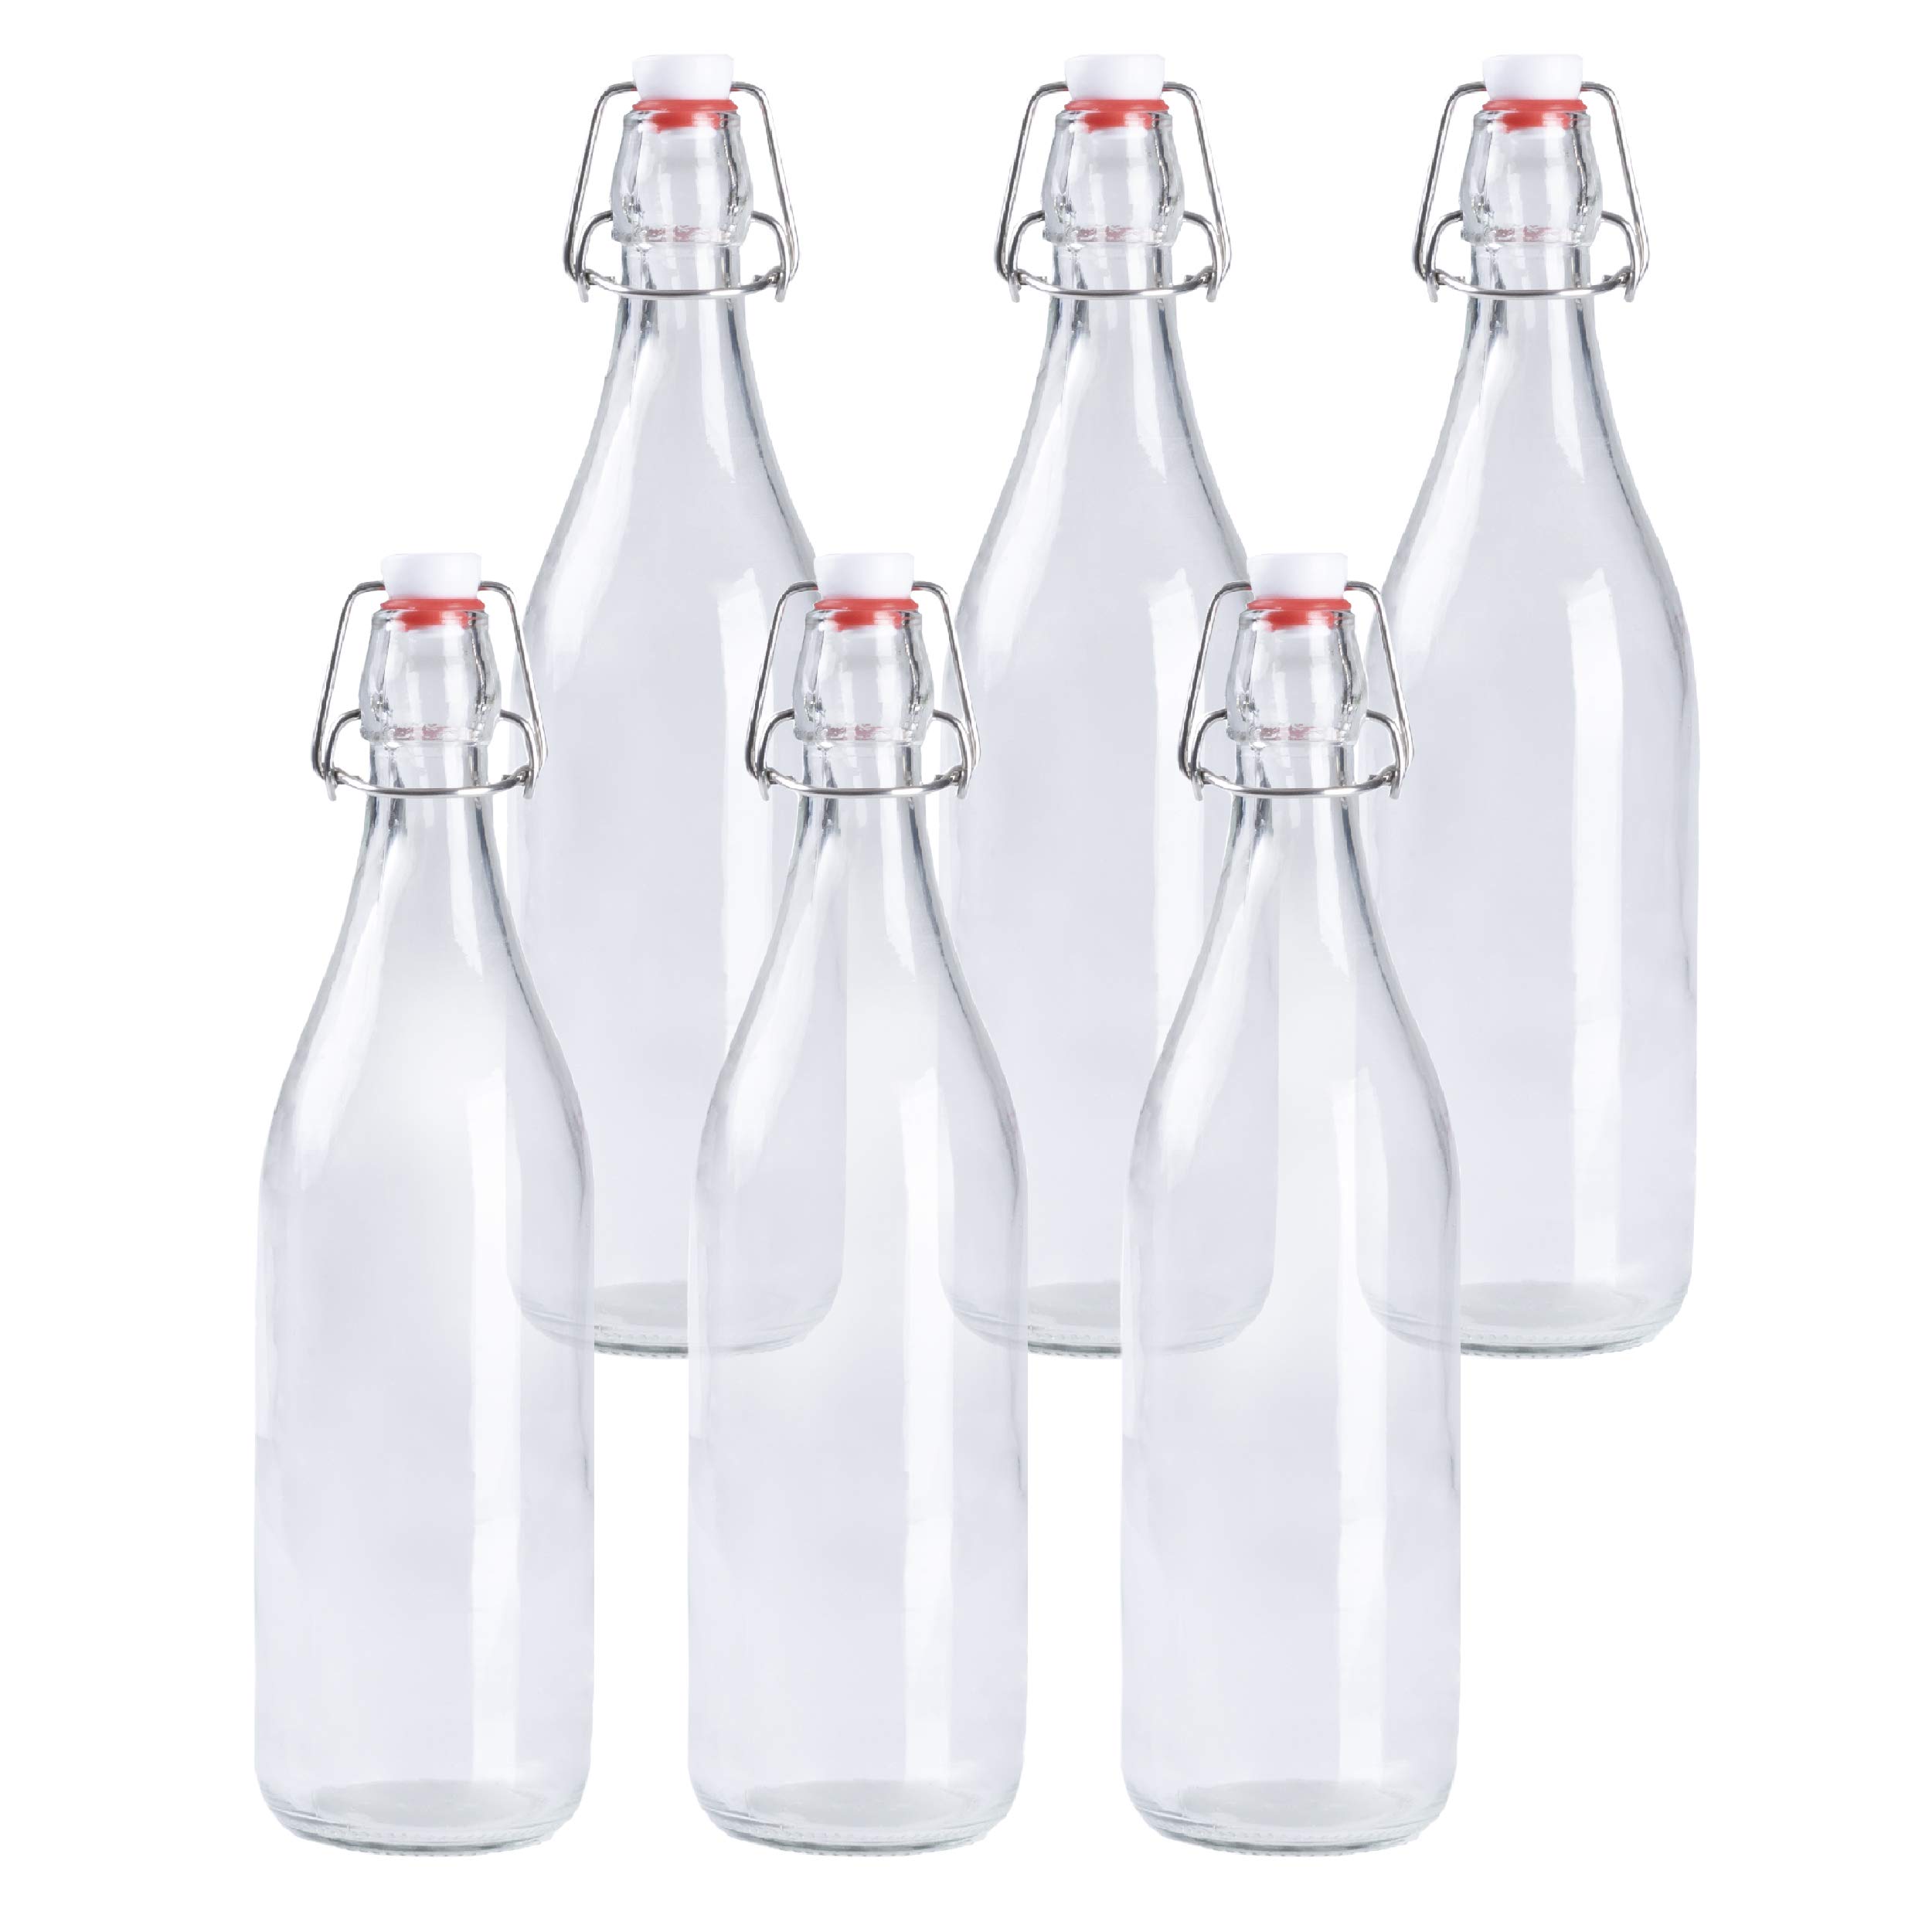 Ilyapa 32 Ounce Clear Swing Top Glass Beer Bottles for Home Brewing - Carbonated Drinks, Kombucha, Kefir, Soda, Juice, Fermentation, 6 Pack Glass B...